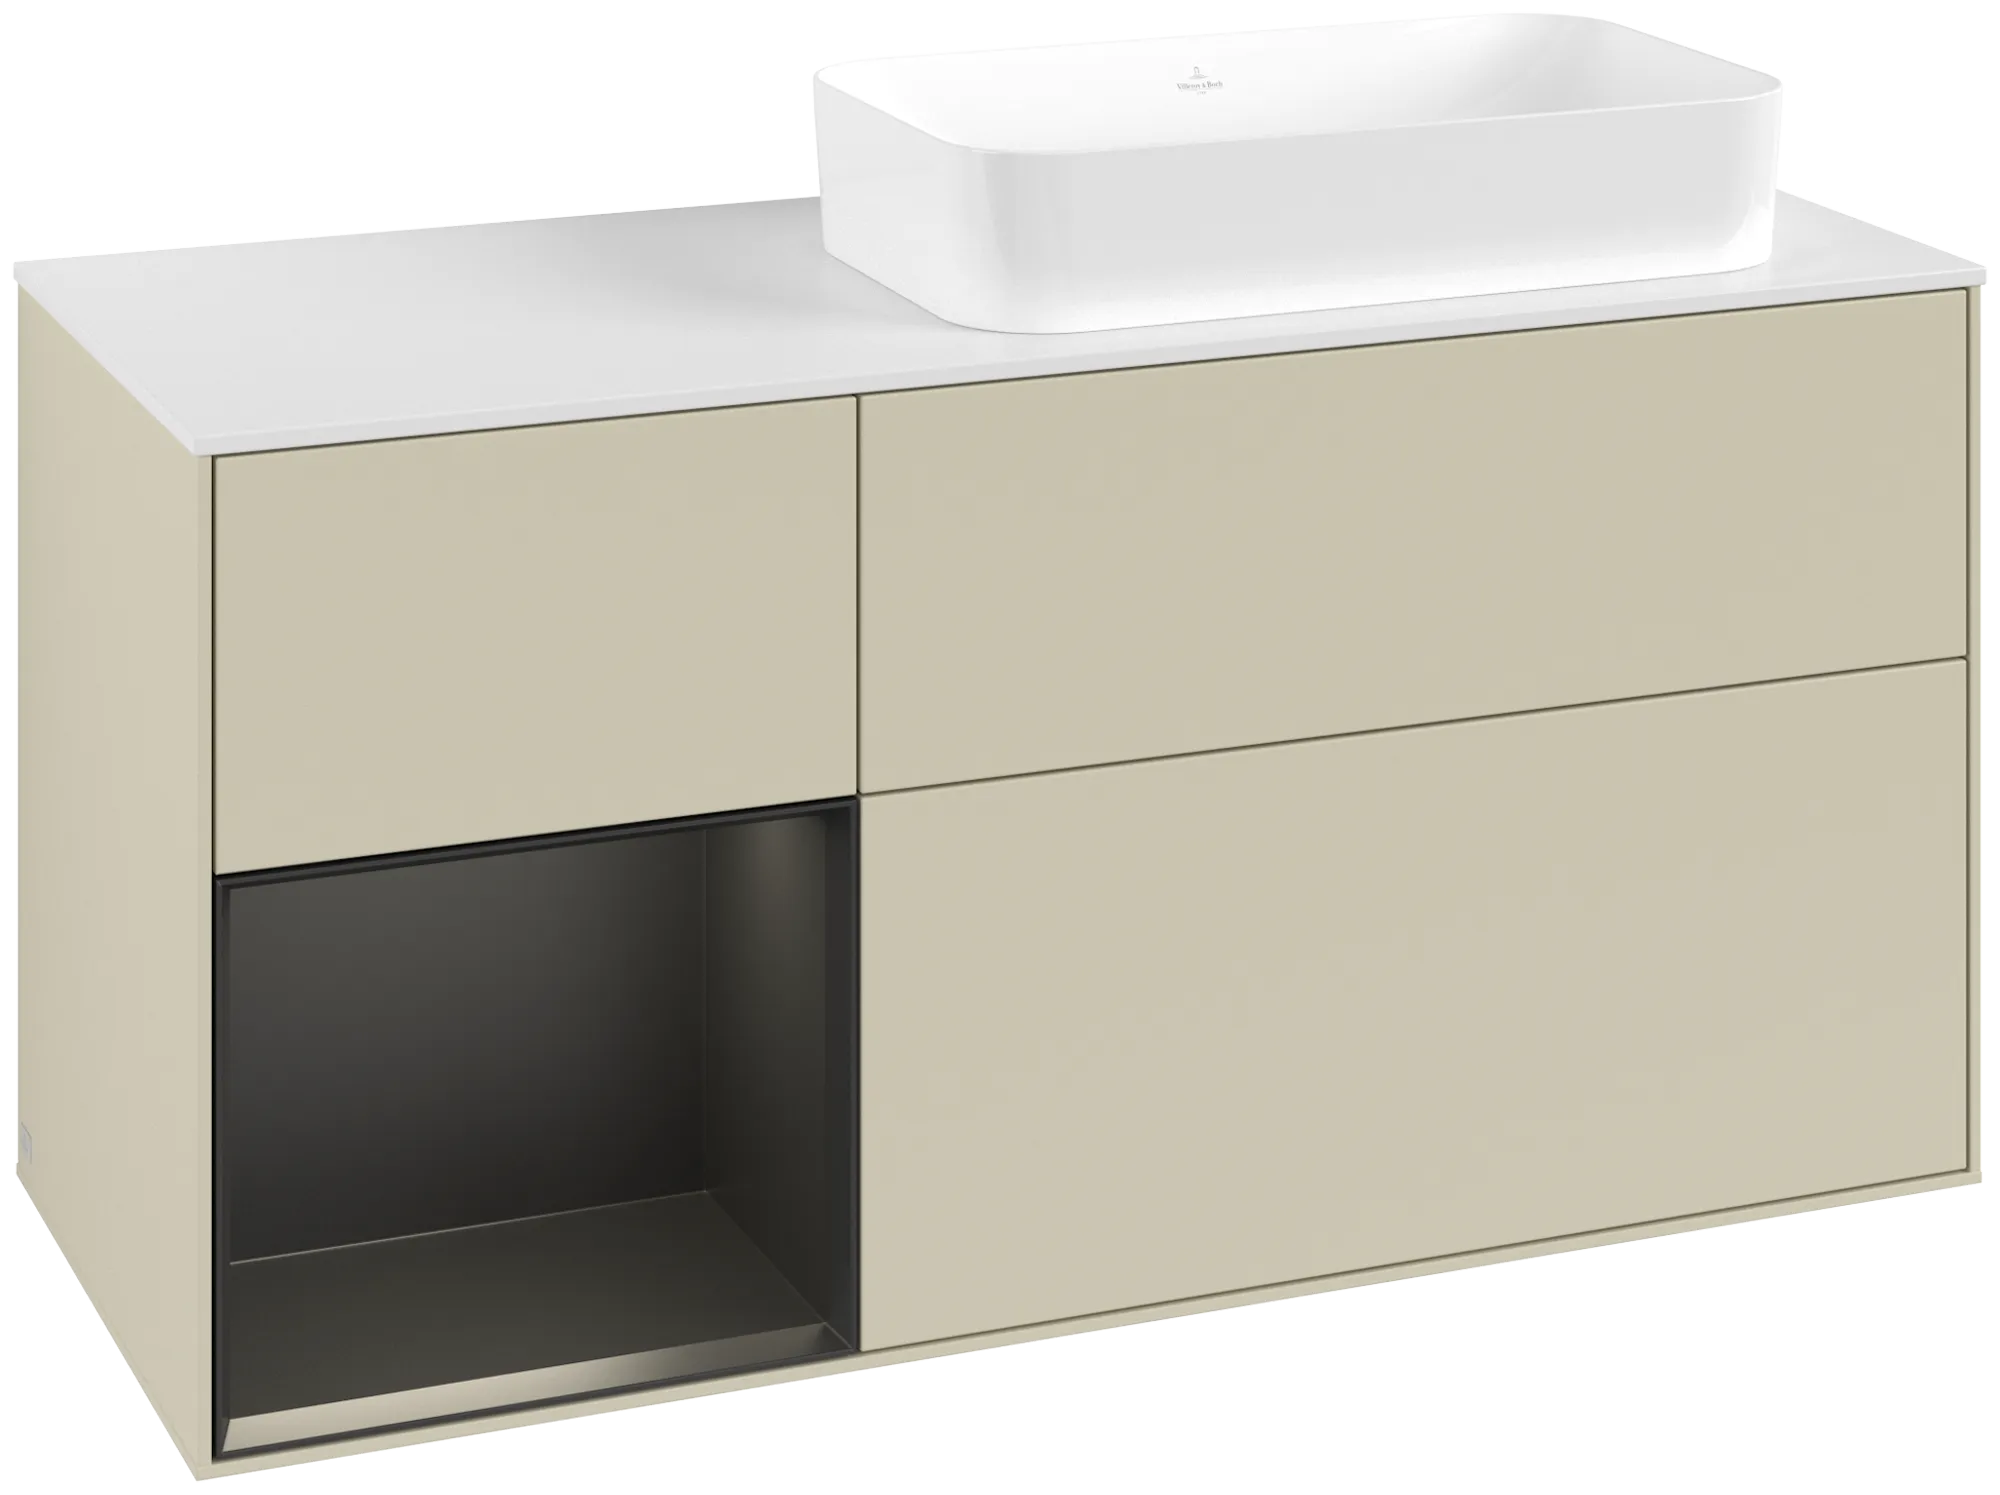 Picture of VILLEROY BOCH Finion Vanity unit, with lighting, 3 pull-out compartments, 1200 x 603 x 501 mm, Silk Grey Matt Lacquer / Black Matt Lacquer / Glass White Matt #G681PDHJ